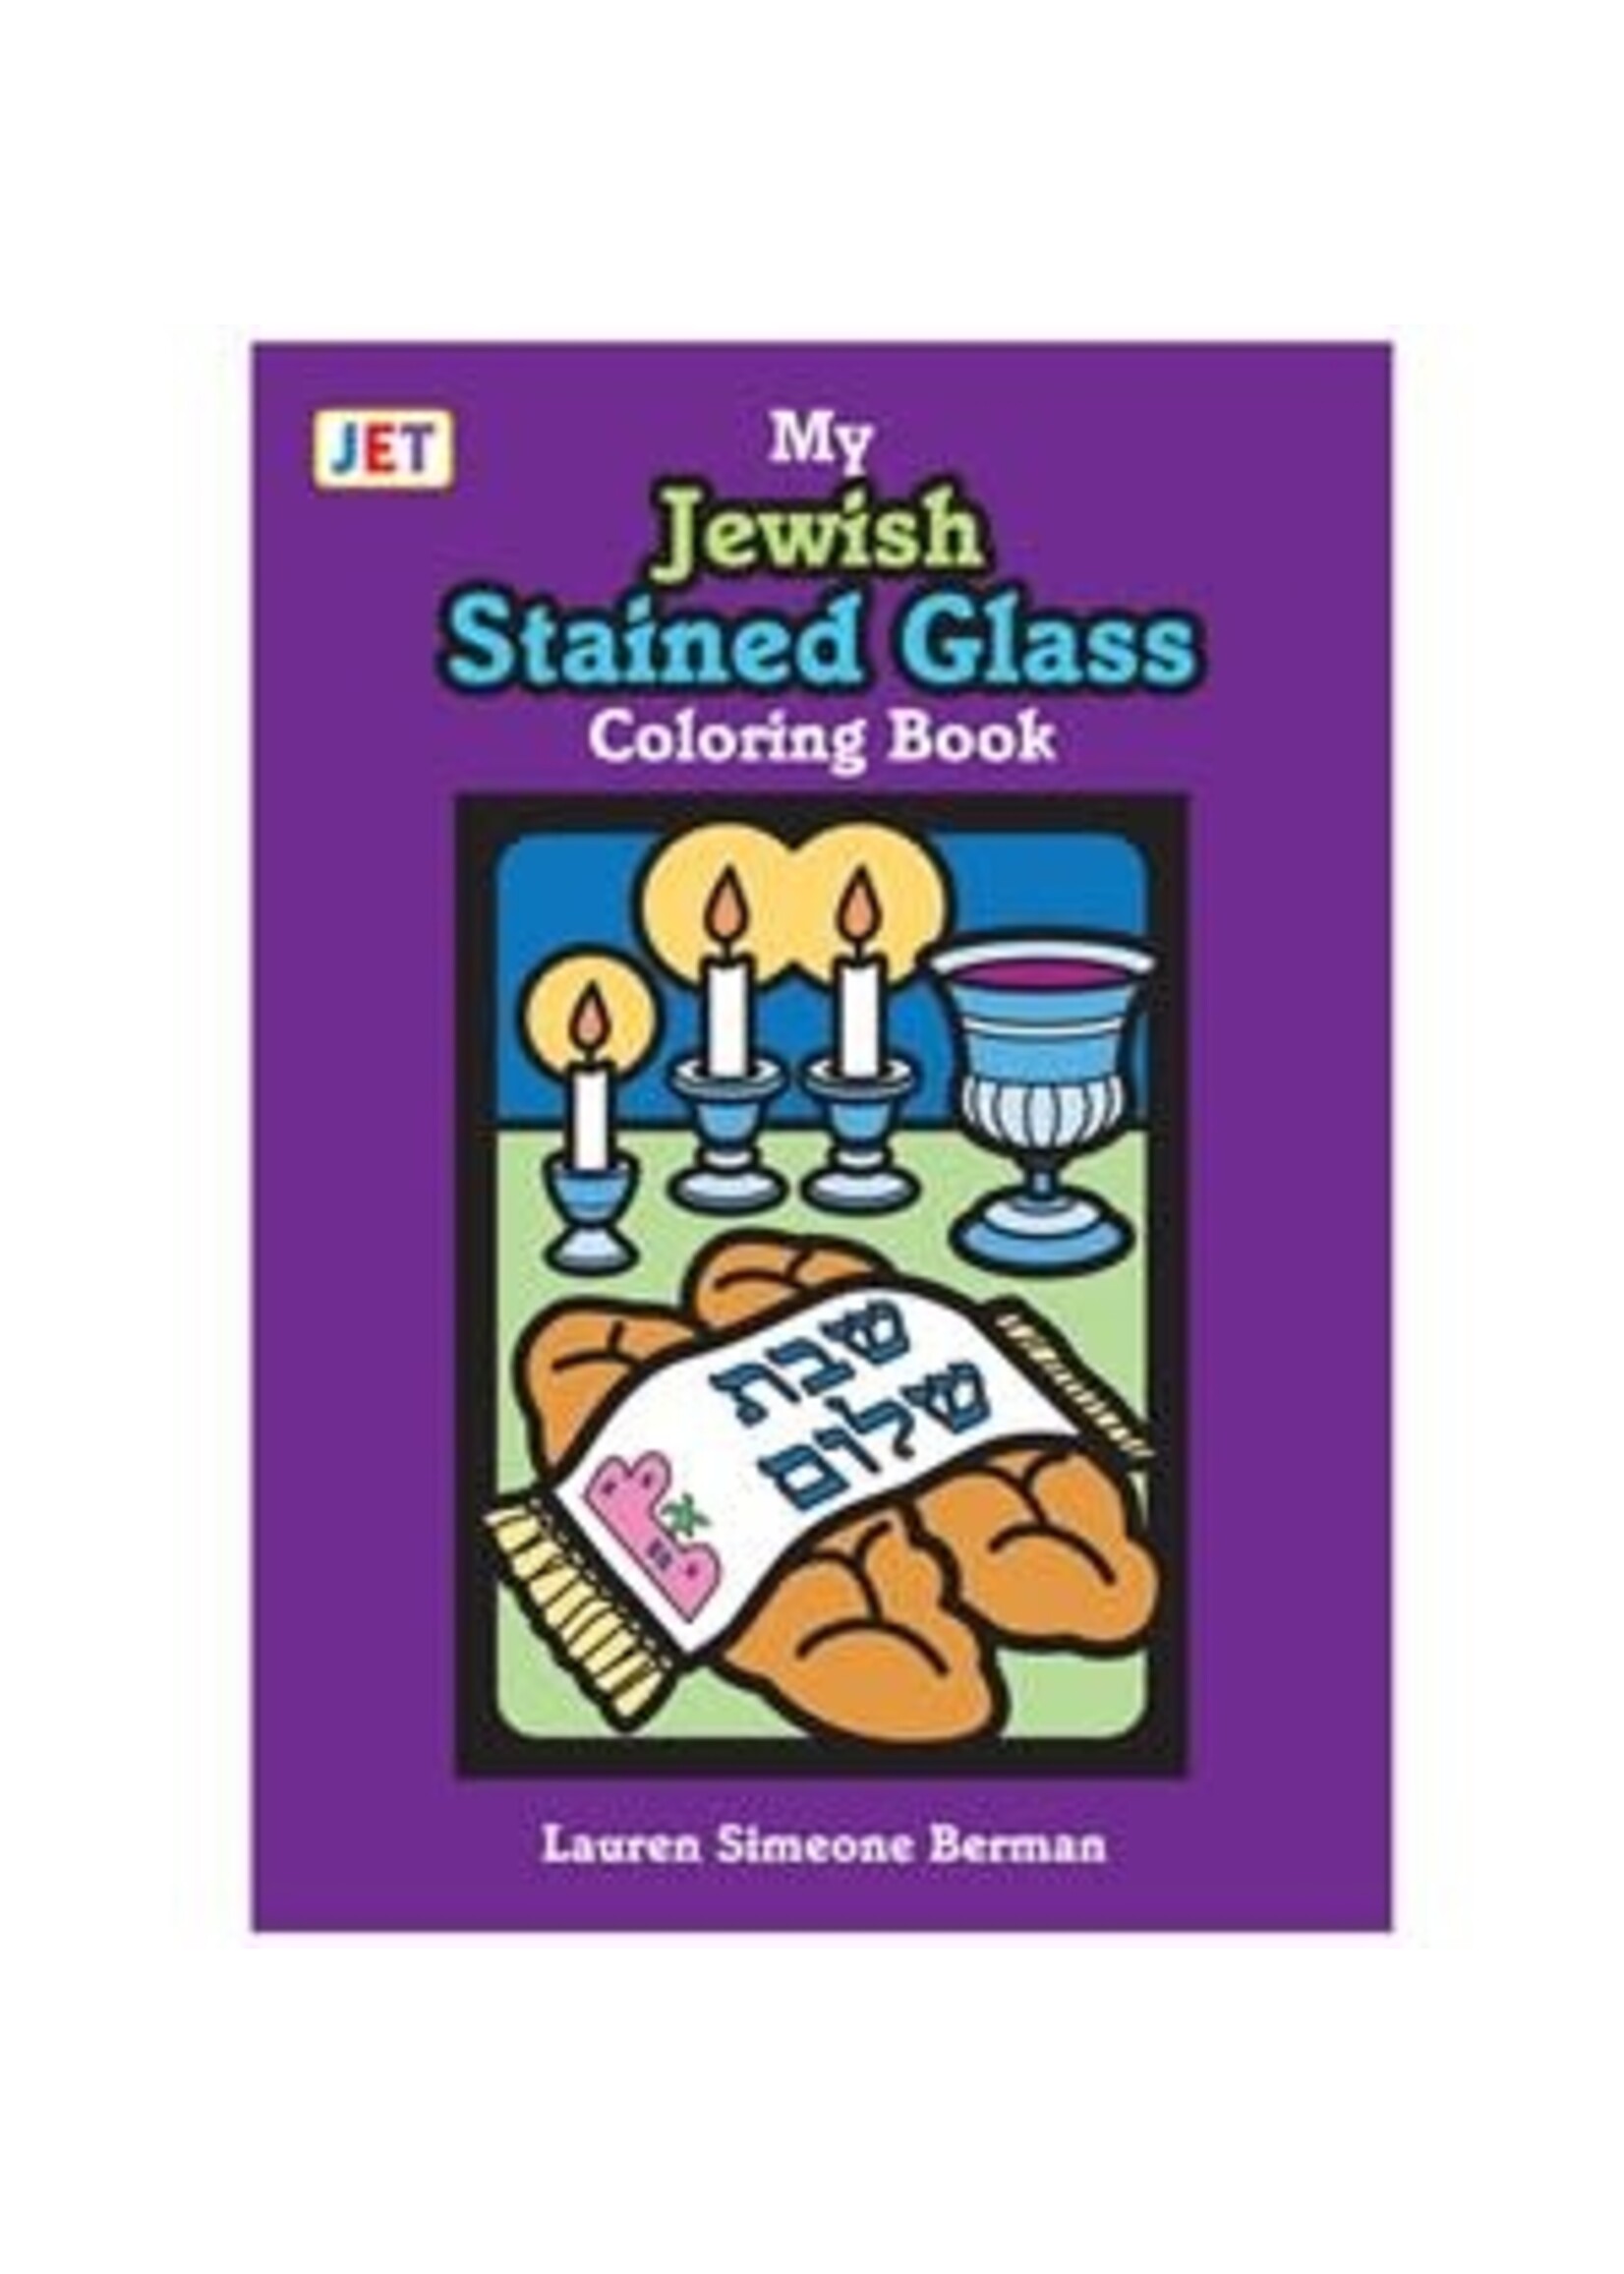 MY JEWISH STAINED GLASS COLORING BOOK